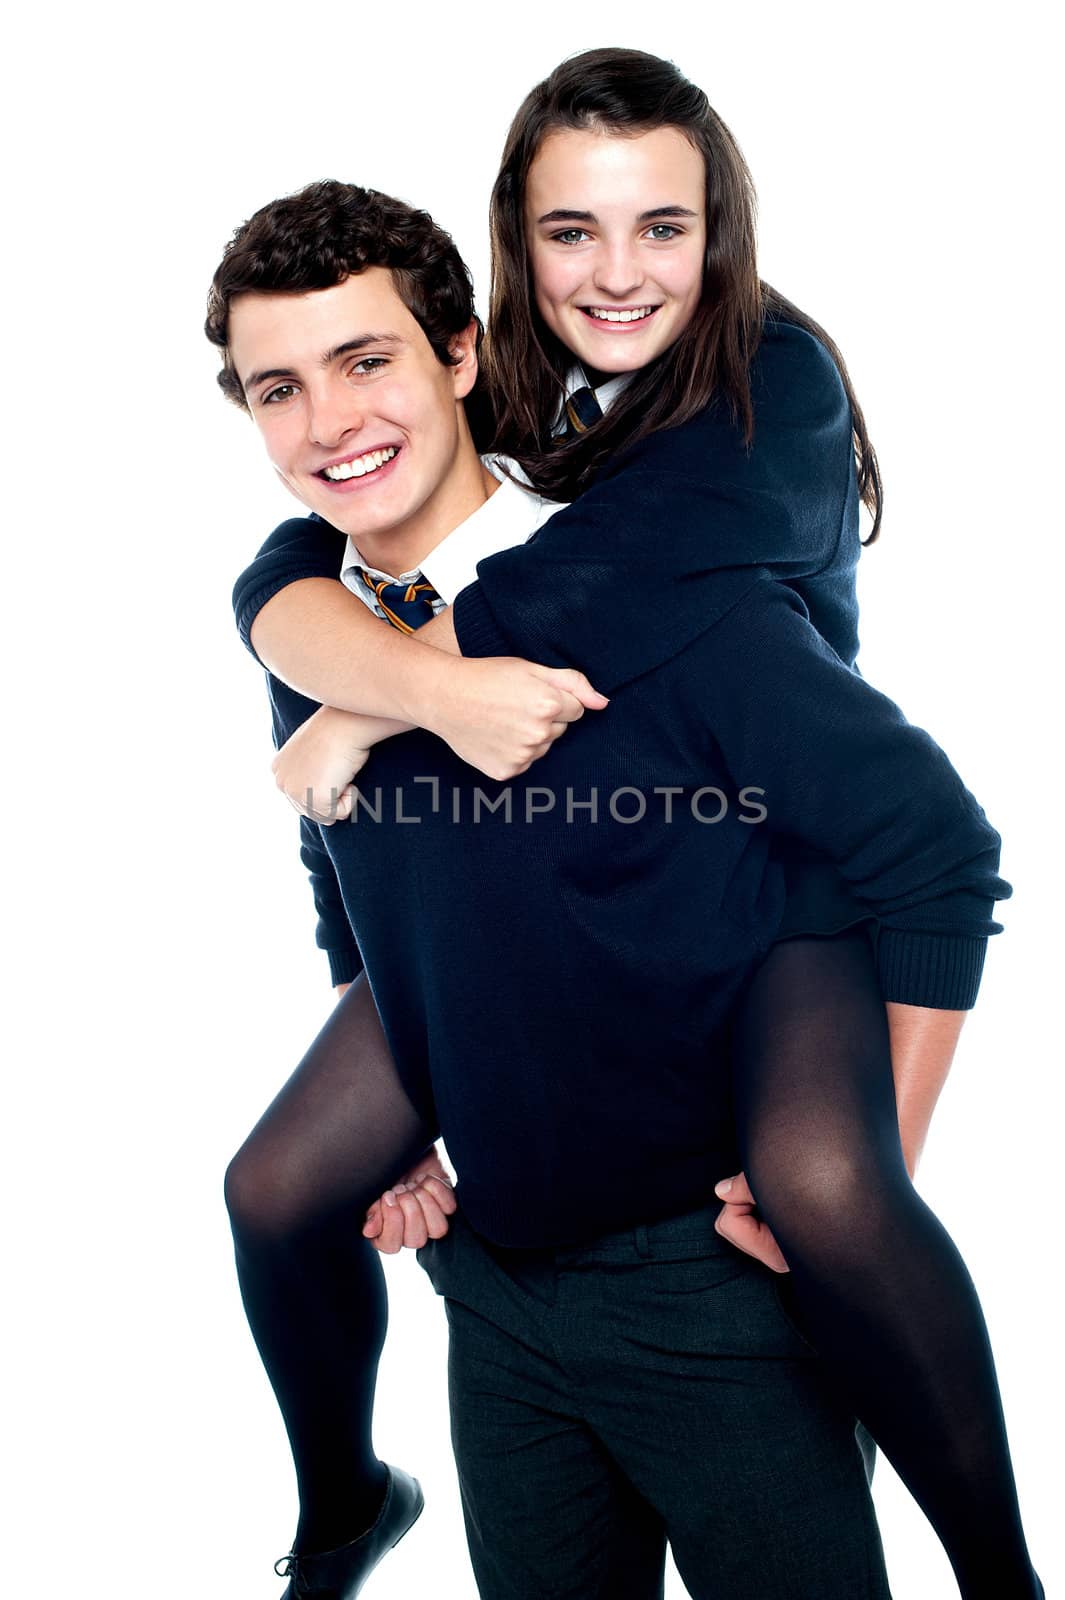 Girl riding piggyback and embracing boy tightly. All on white background